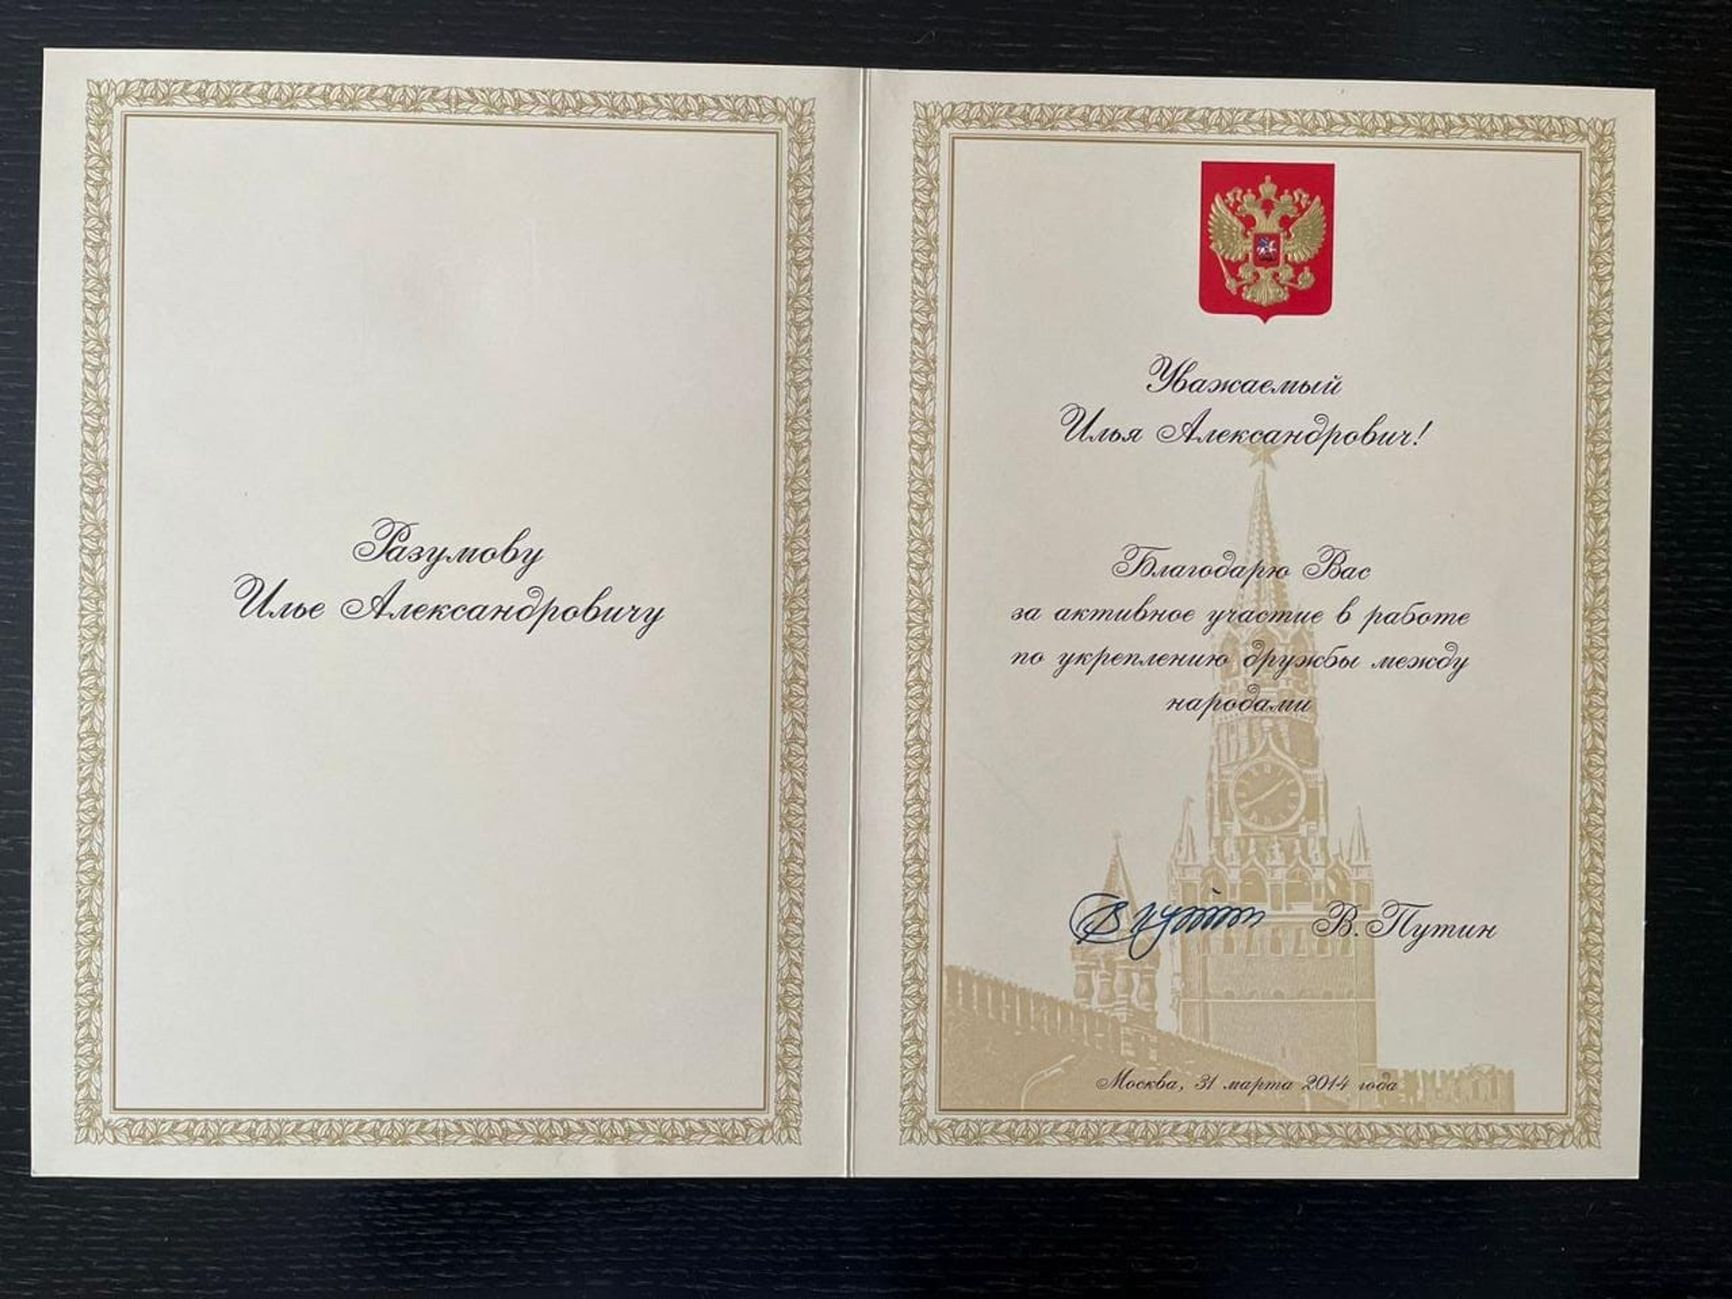 Letter of commendation from Putin